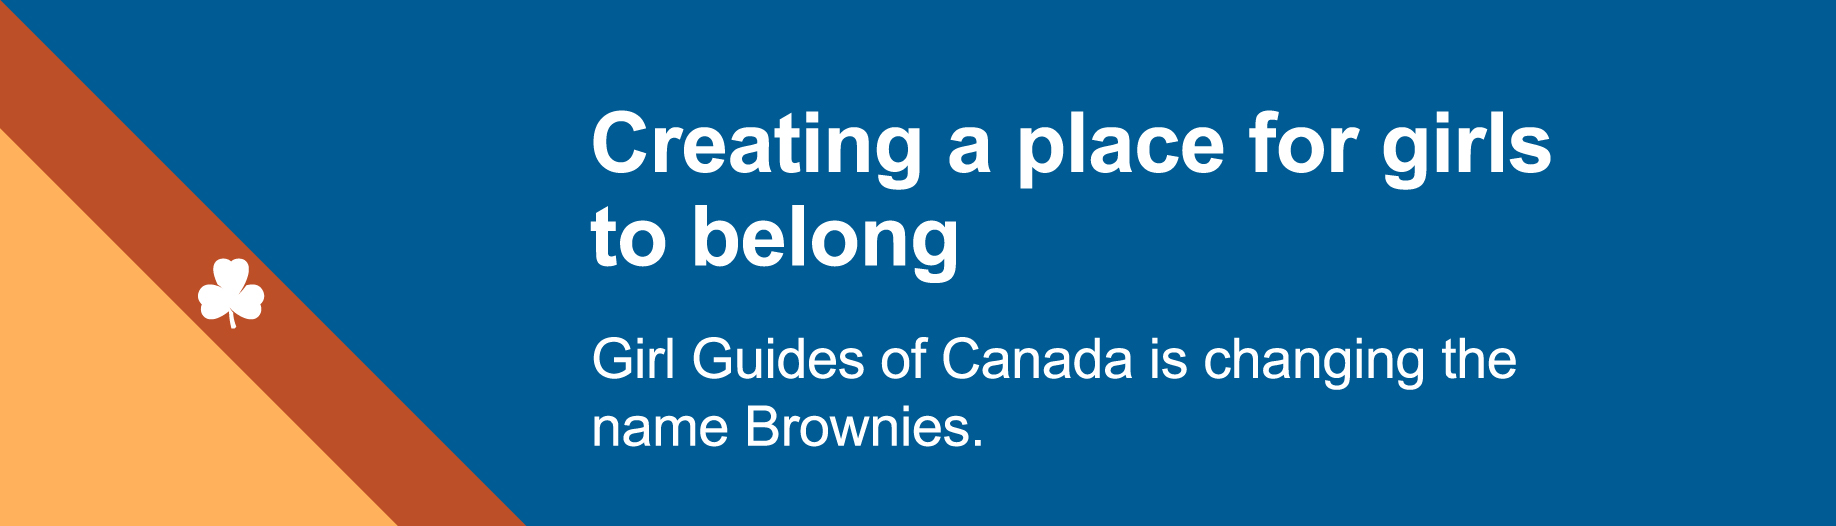 Creating a place for girls to belong. Girl Guides of Canada is changing the name Brownies. 